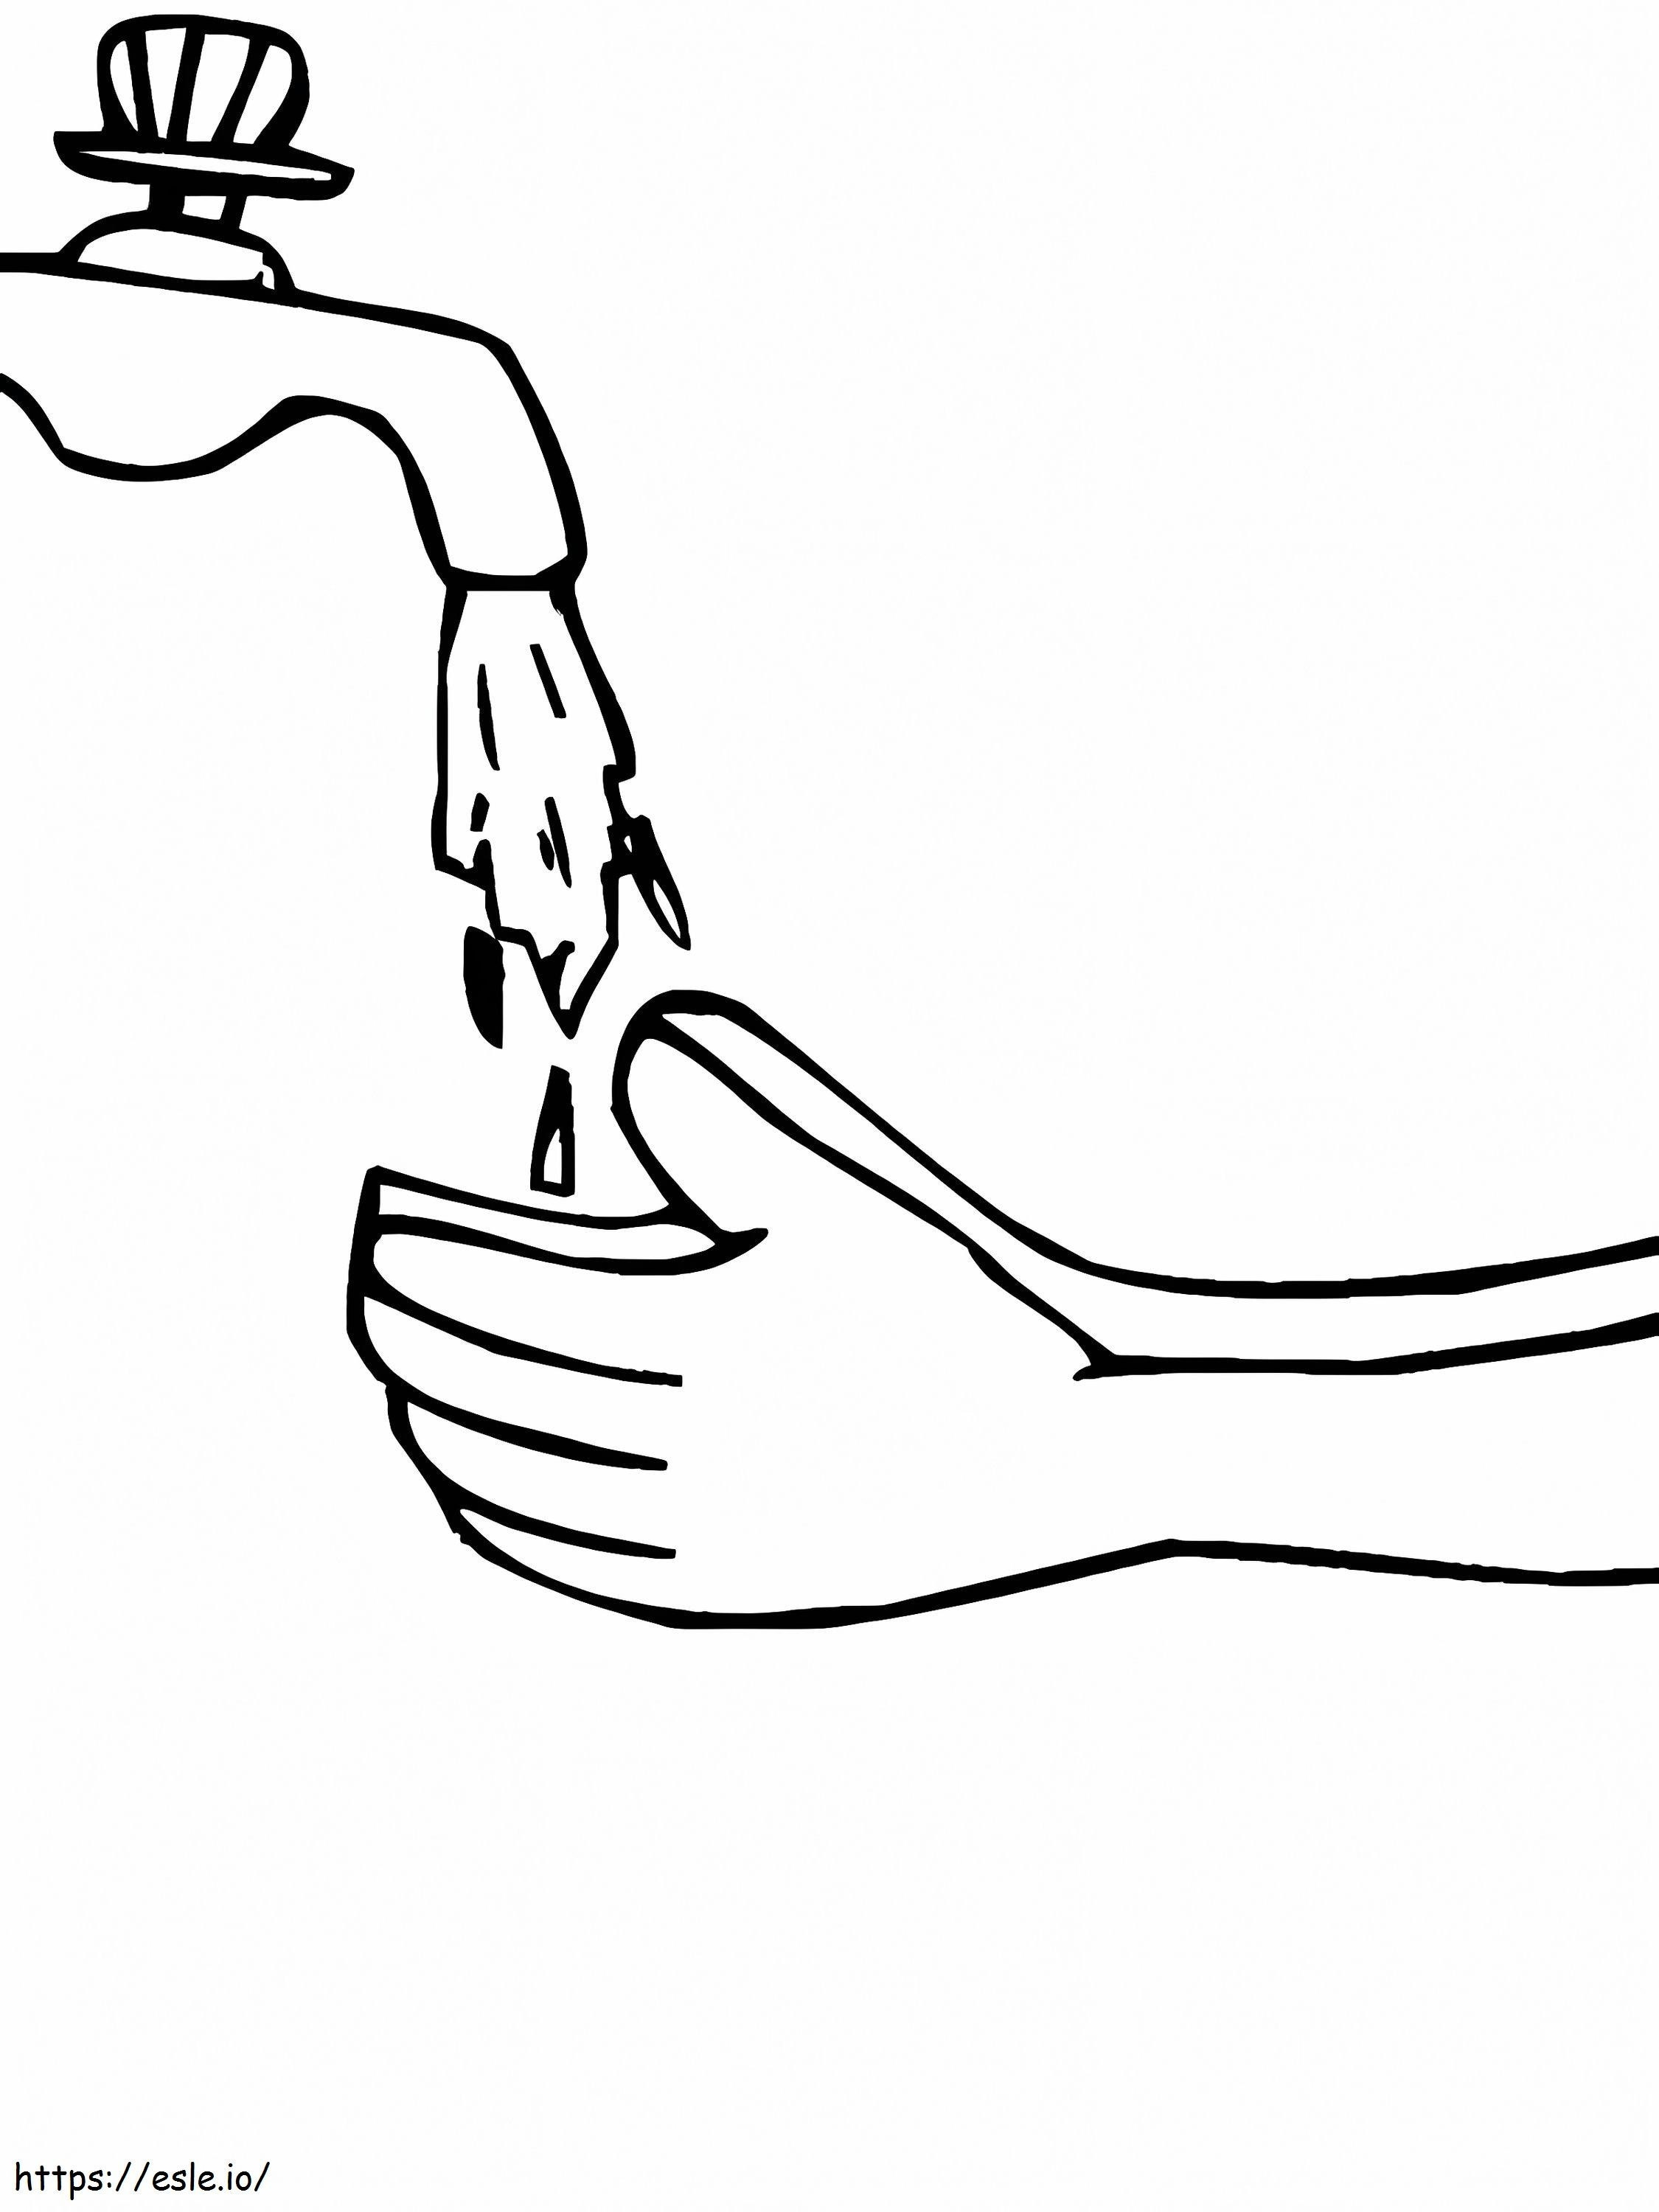 Free Printable Wash Your Hands coloring page